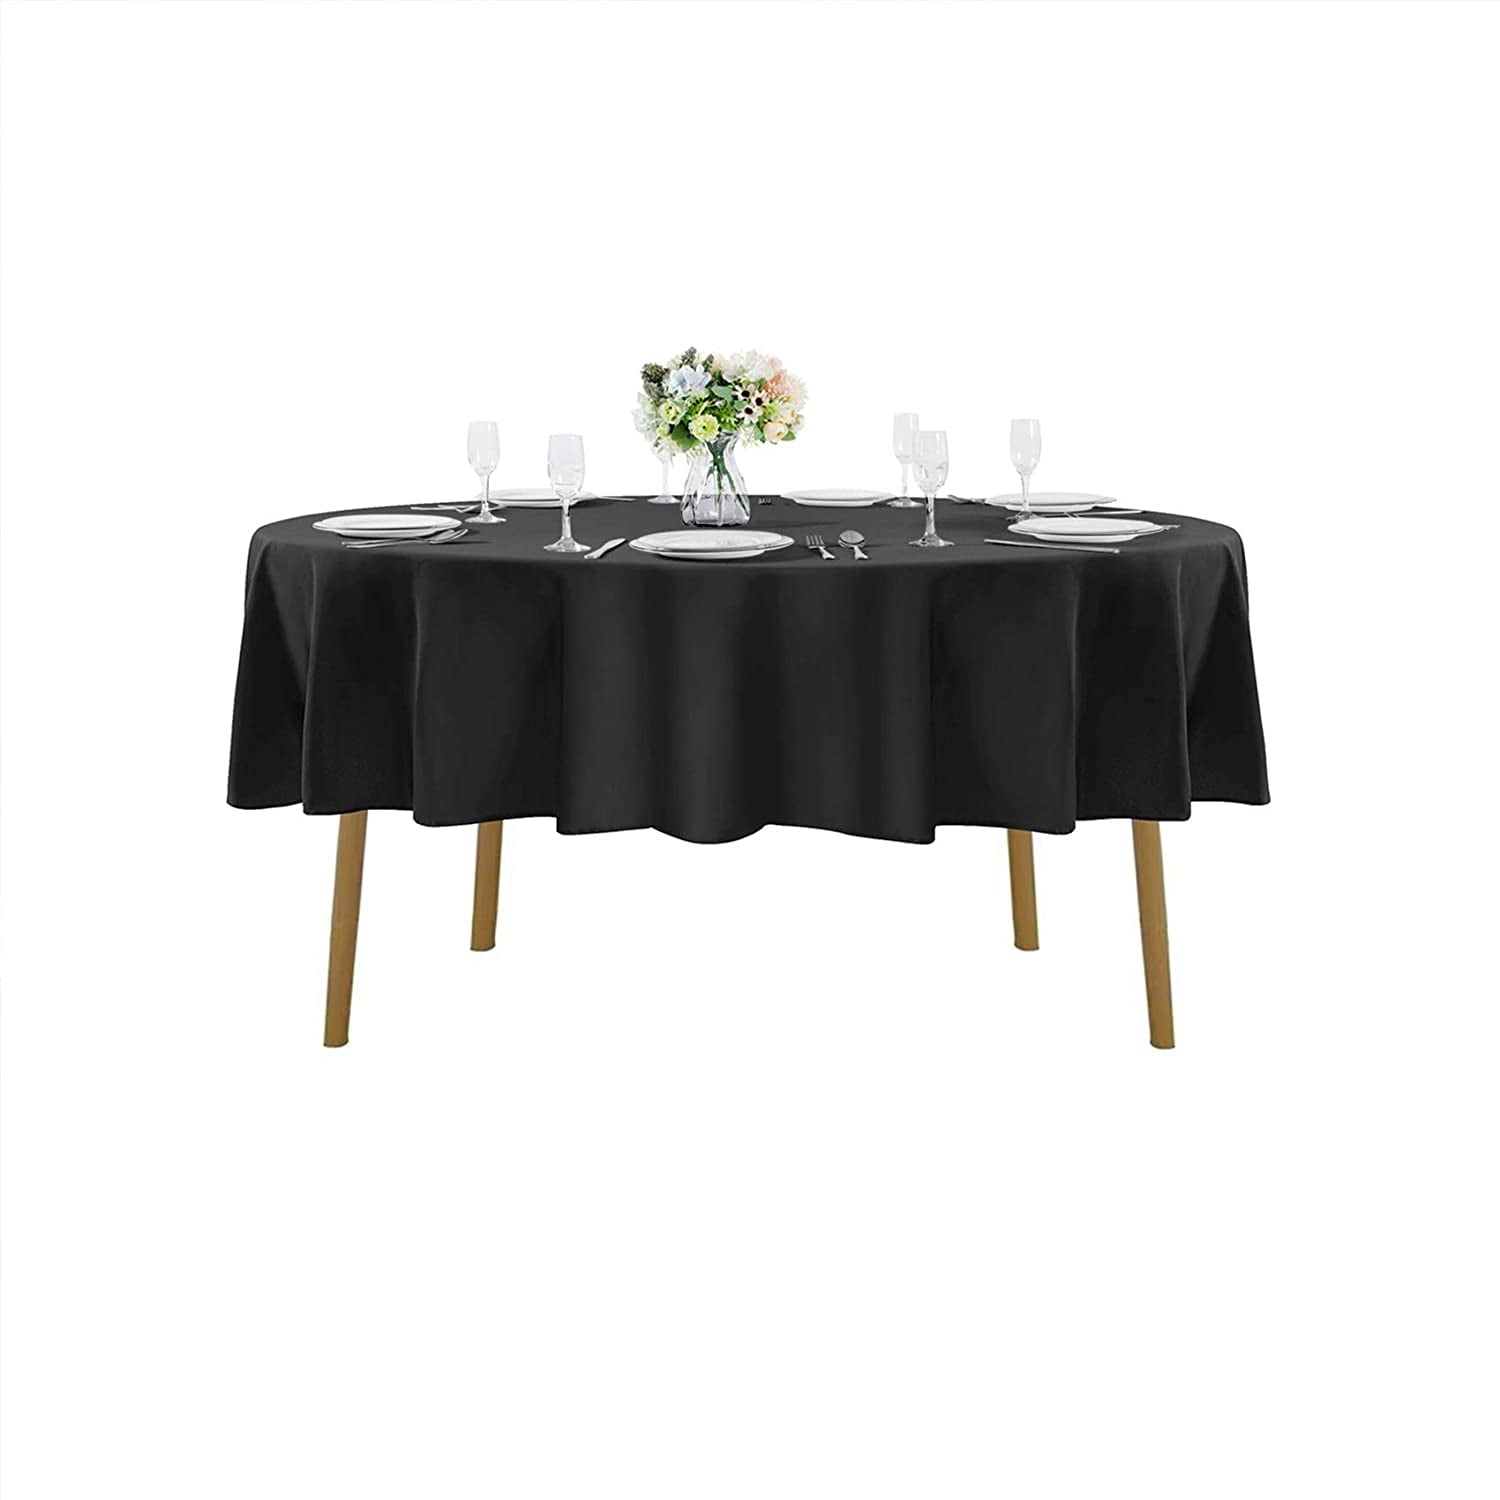 48" Inch Black Round Tablecloth For Polyester Fabric For Catering Party 